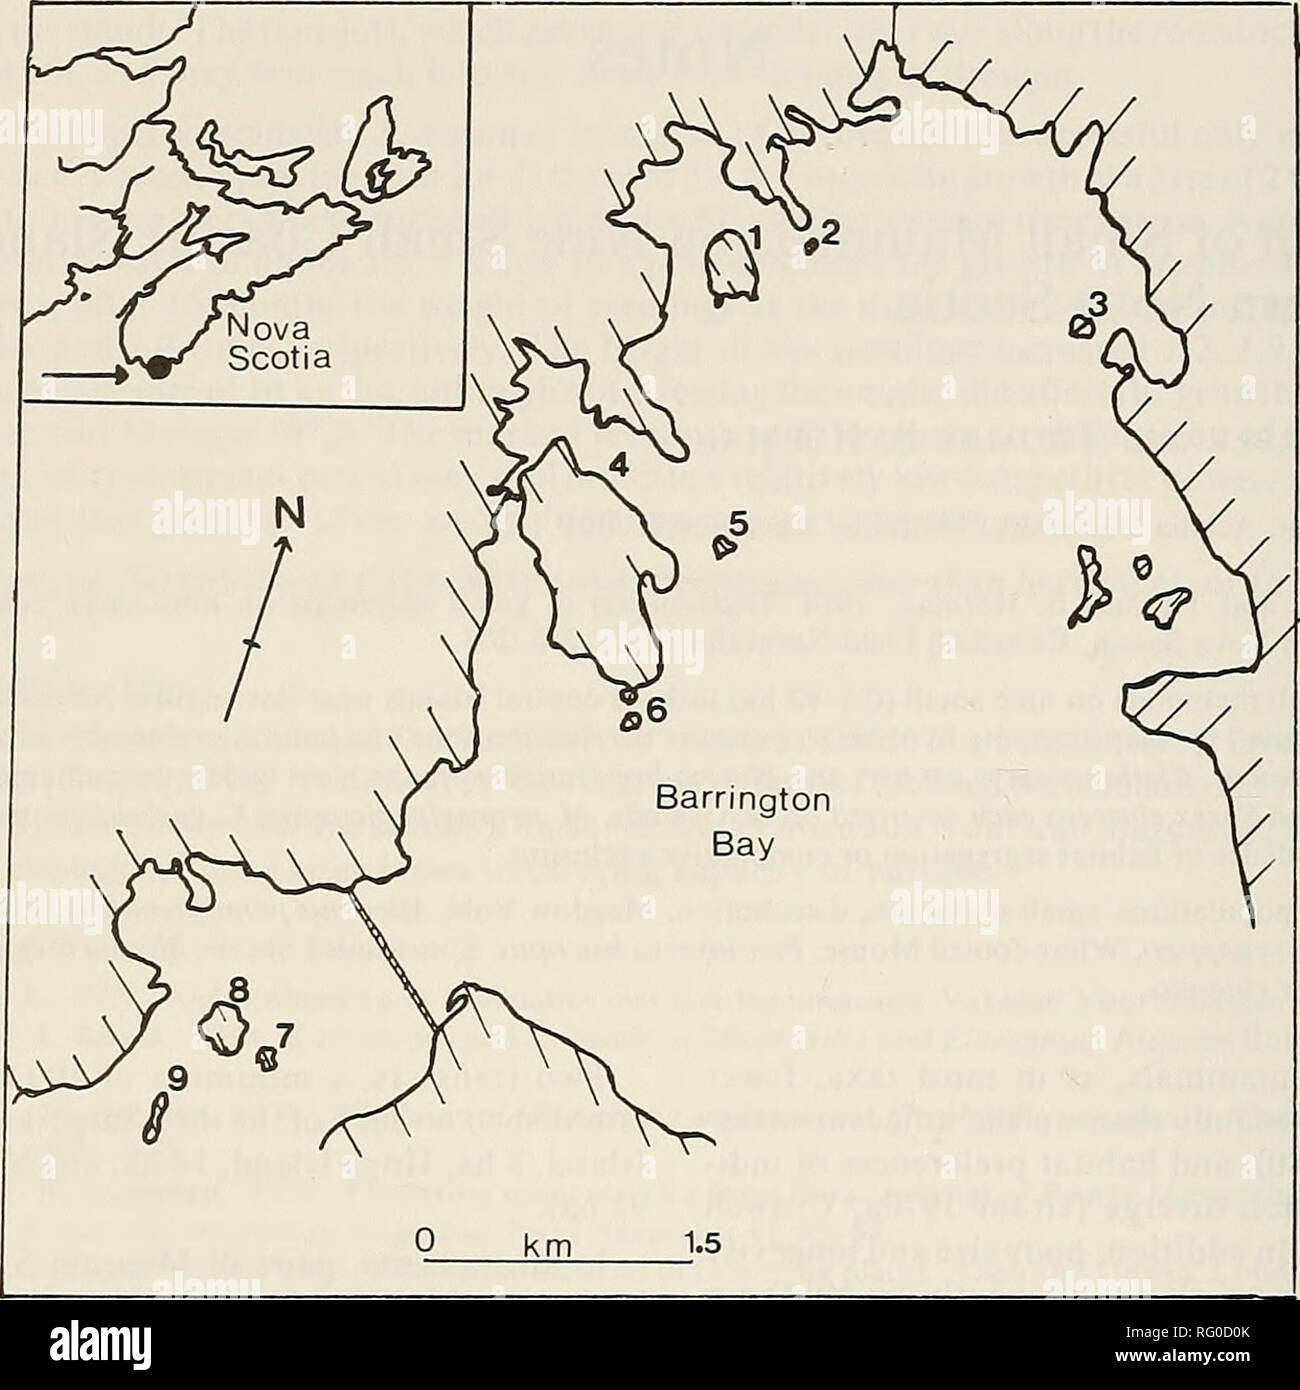 . The Canadian field-naturalist. 246 The Canadian Field-Naturalist Vol. 98. Figure I. Study area. 1 — Hogg Is., 2 — Thrum Cap; 3 — Blackberry Is.; 4 — Sherosels.; 5 — One Tree Is.; 6 — Bald Thrum; 7 — Cove Thrum; 8 — Banks Is.; 9 — Pound Is. leucopus are both woodland species, and generally require larger islands (Crowell 1973). The islands containing only C. gapperi were predomi- nantly wooded, but contained some habitat suitable for Microtus. The apparent absence of the latter from these two islands may only reflect the extremely low numbers of M. pennsylvanicus on the adjacent mainland at t Stock Photo